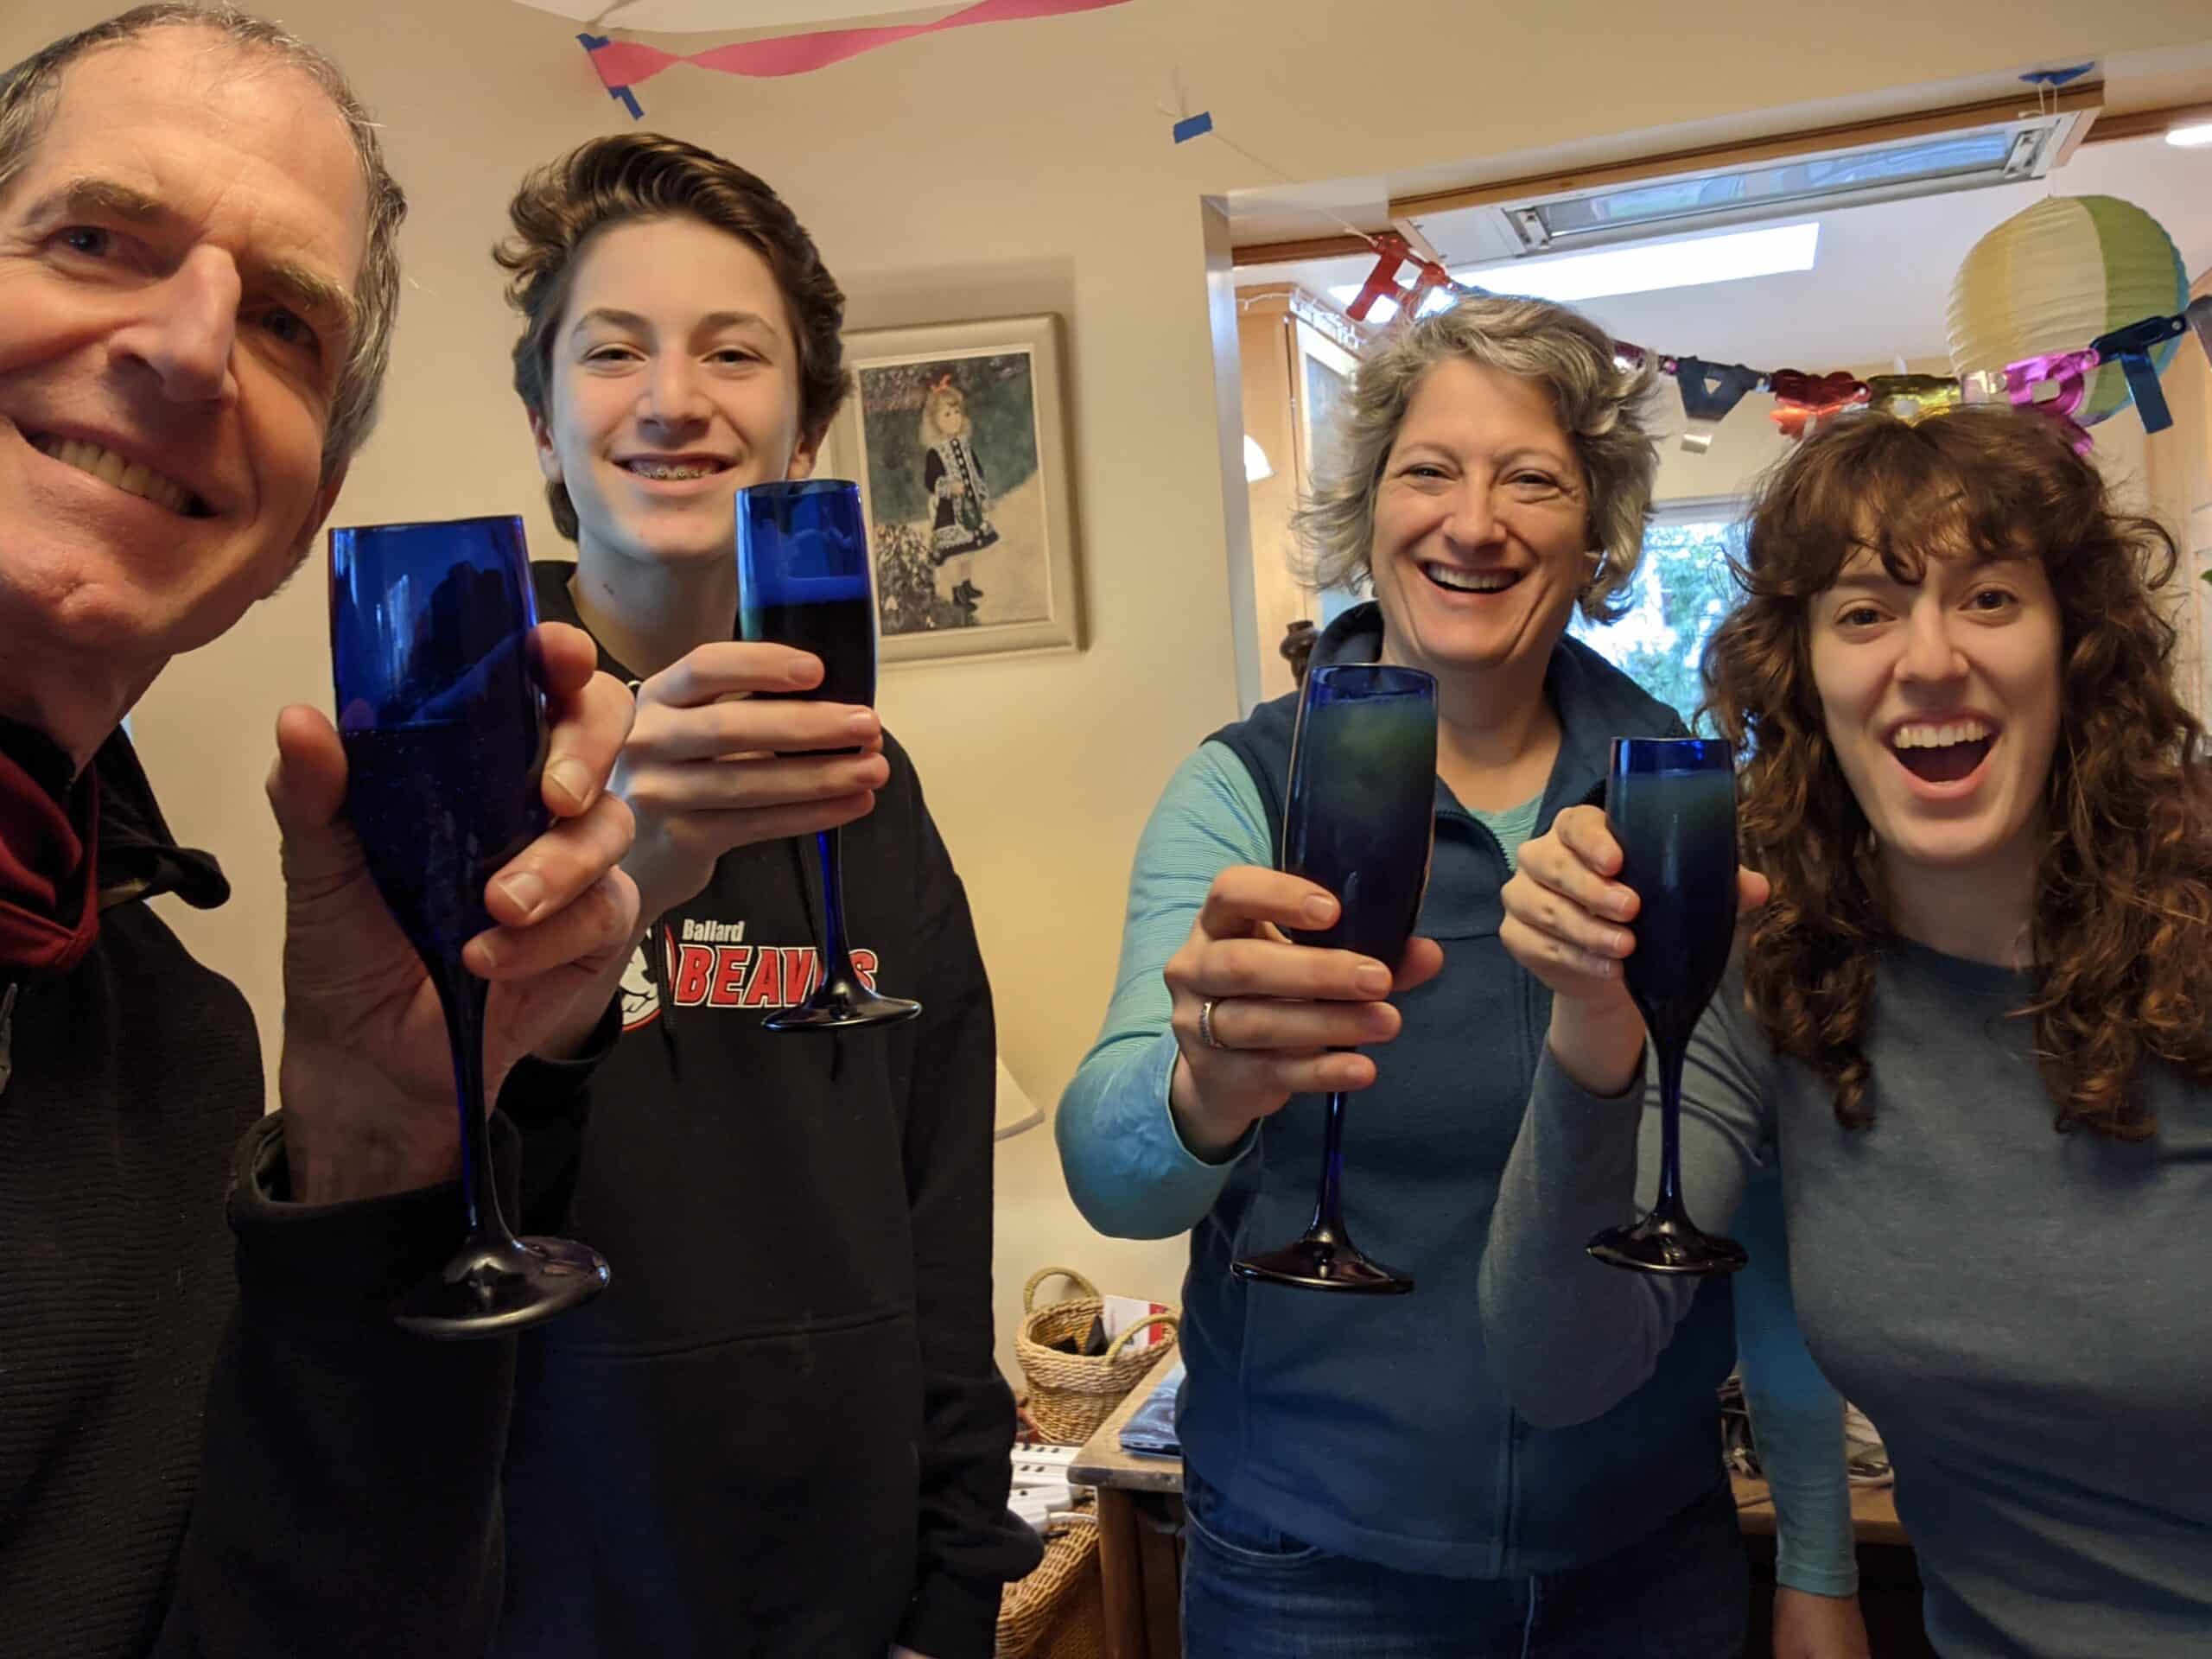 The Pottharst-Ralston Family celebrating and drinking a beverage. From left to right: Ed, Danny, Elizabeth, Amy